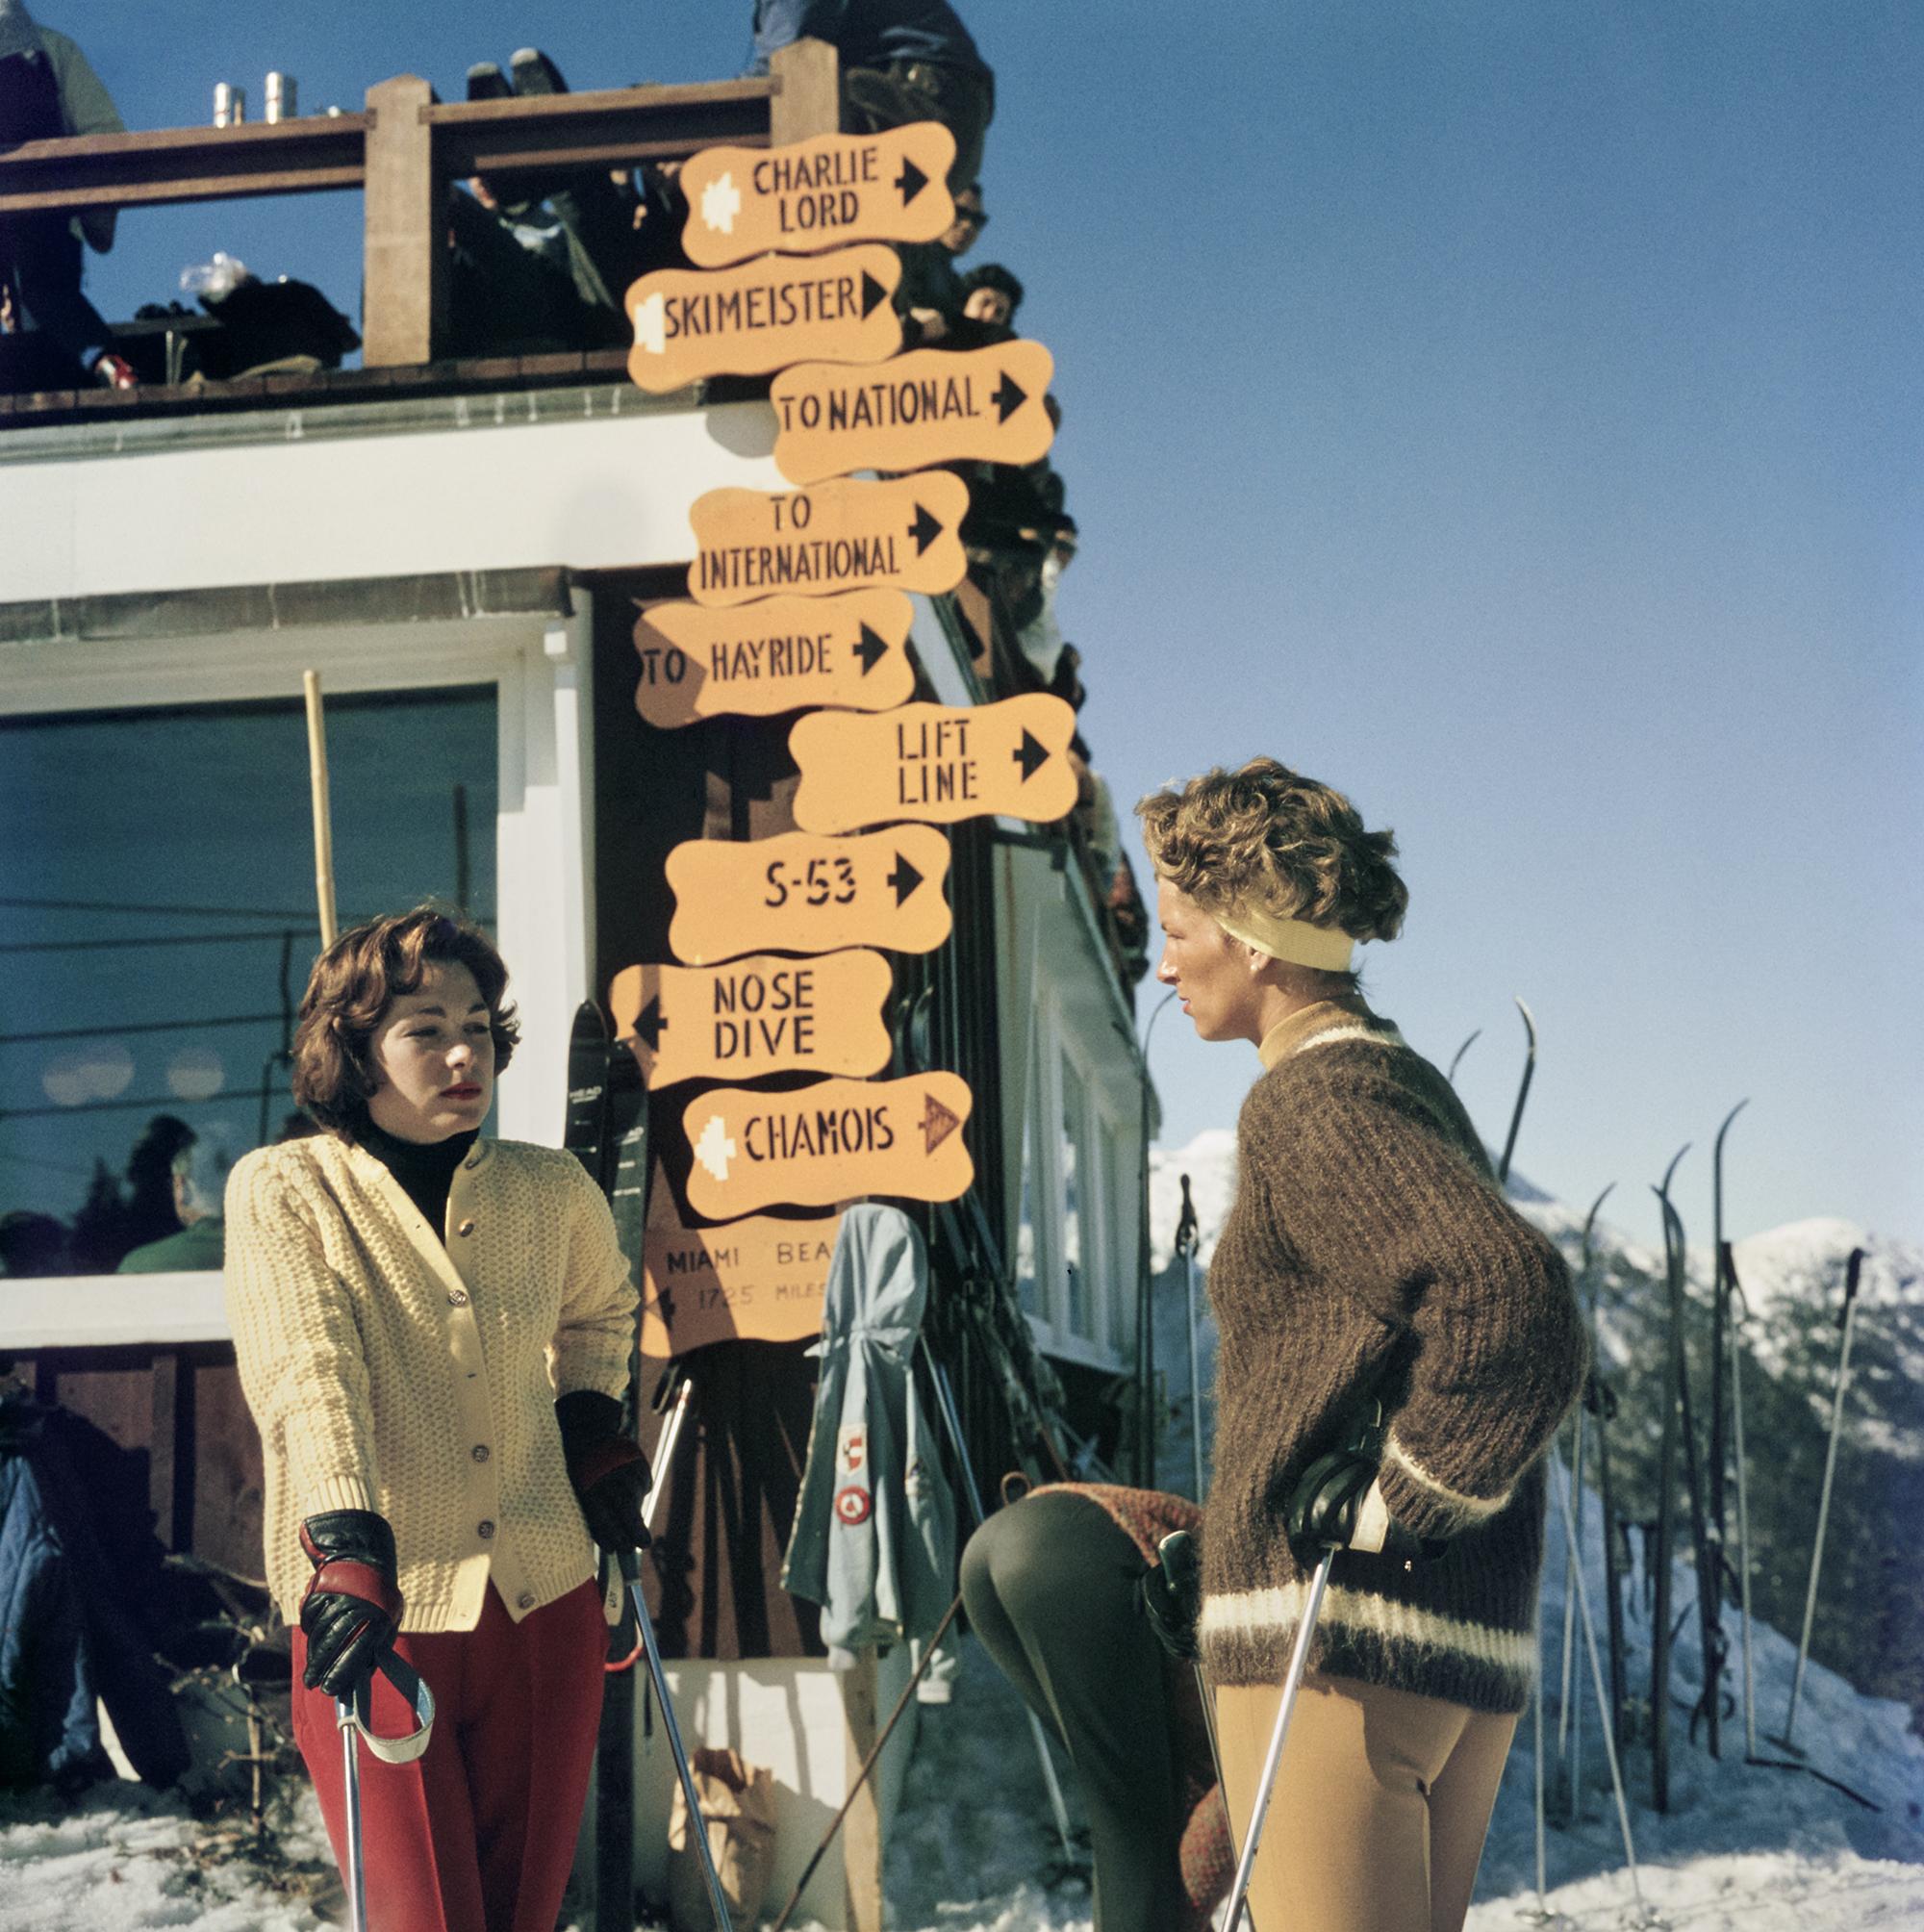 Skiing in Stowe by Slim Aarons (Landscape photography)